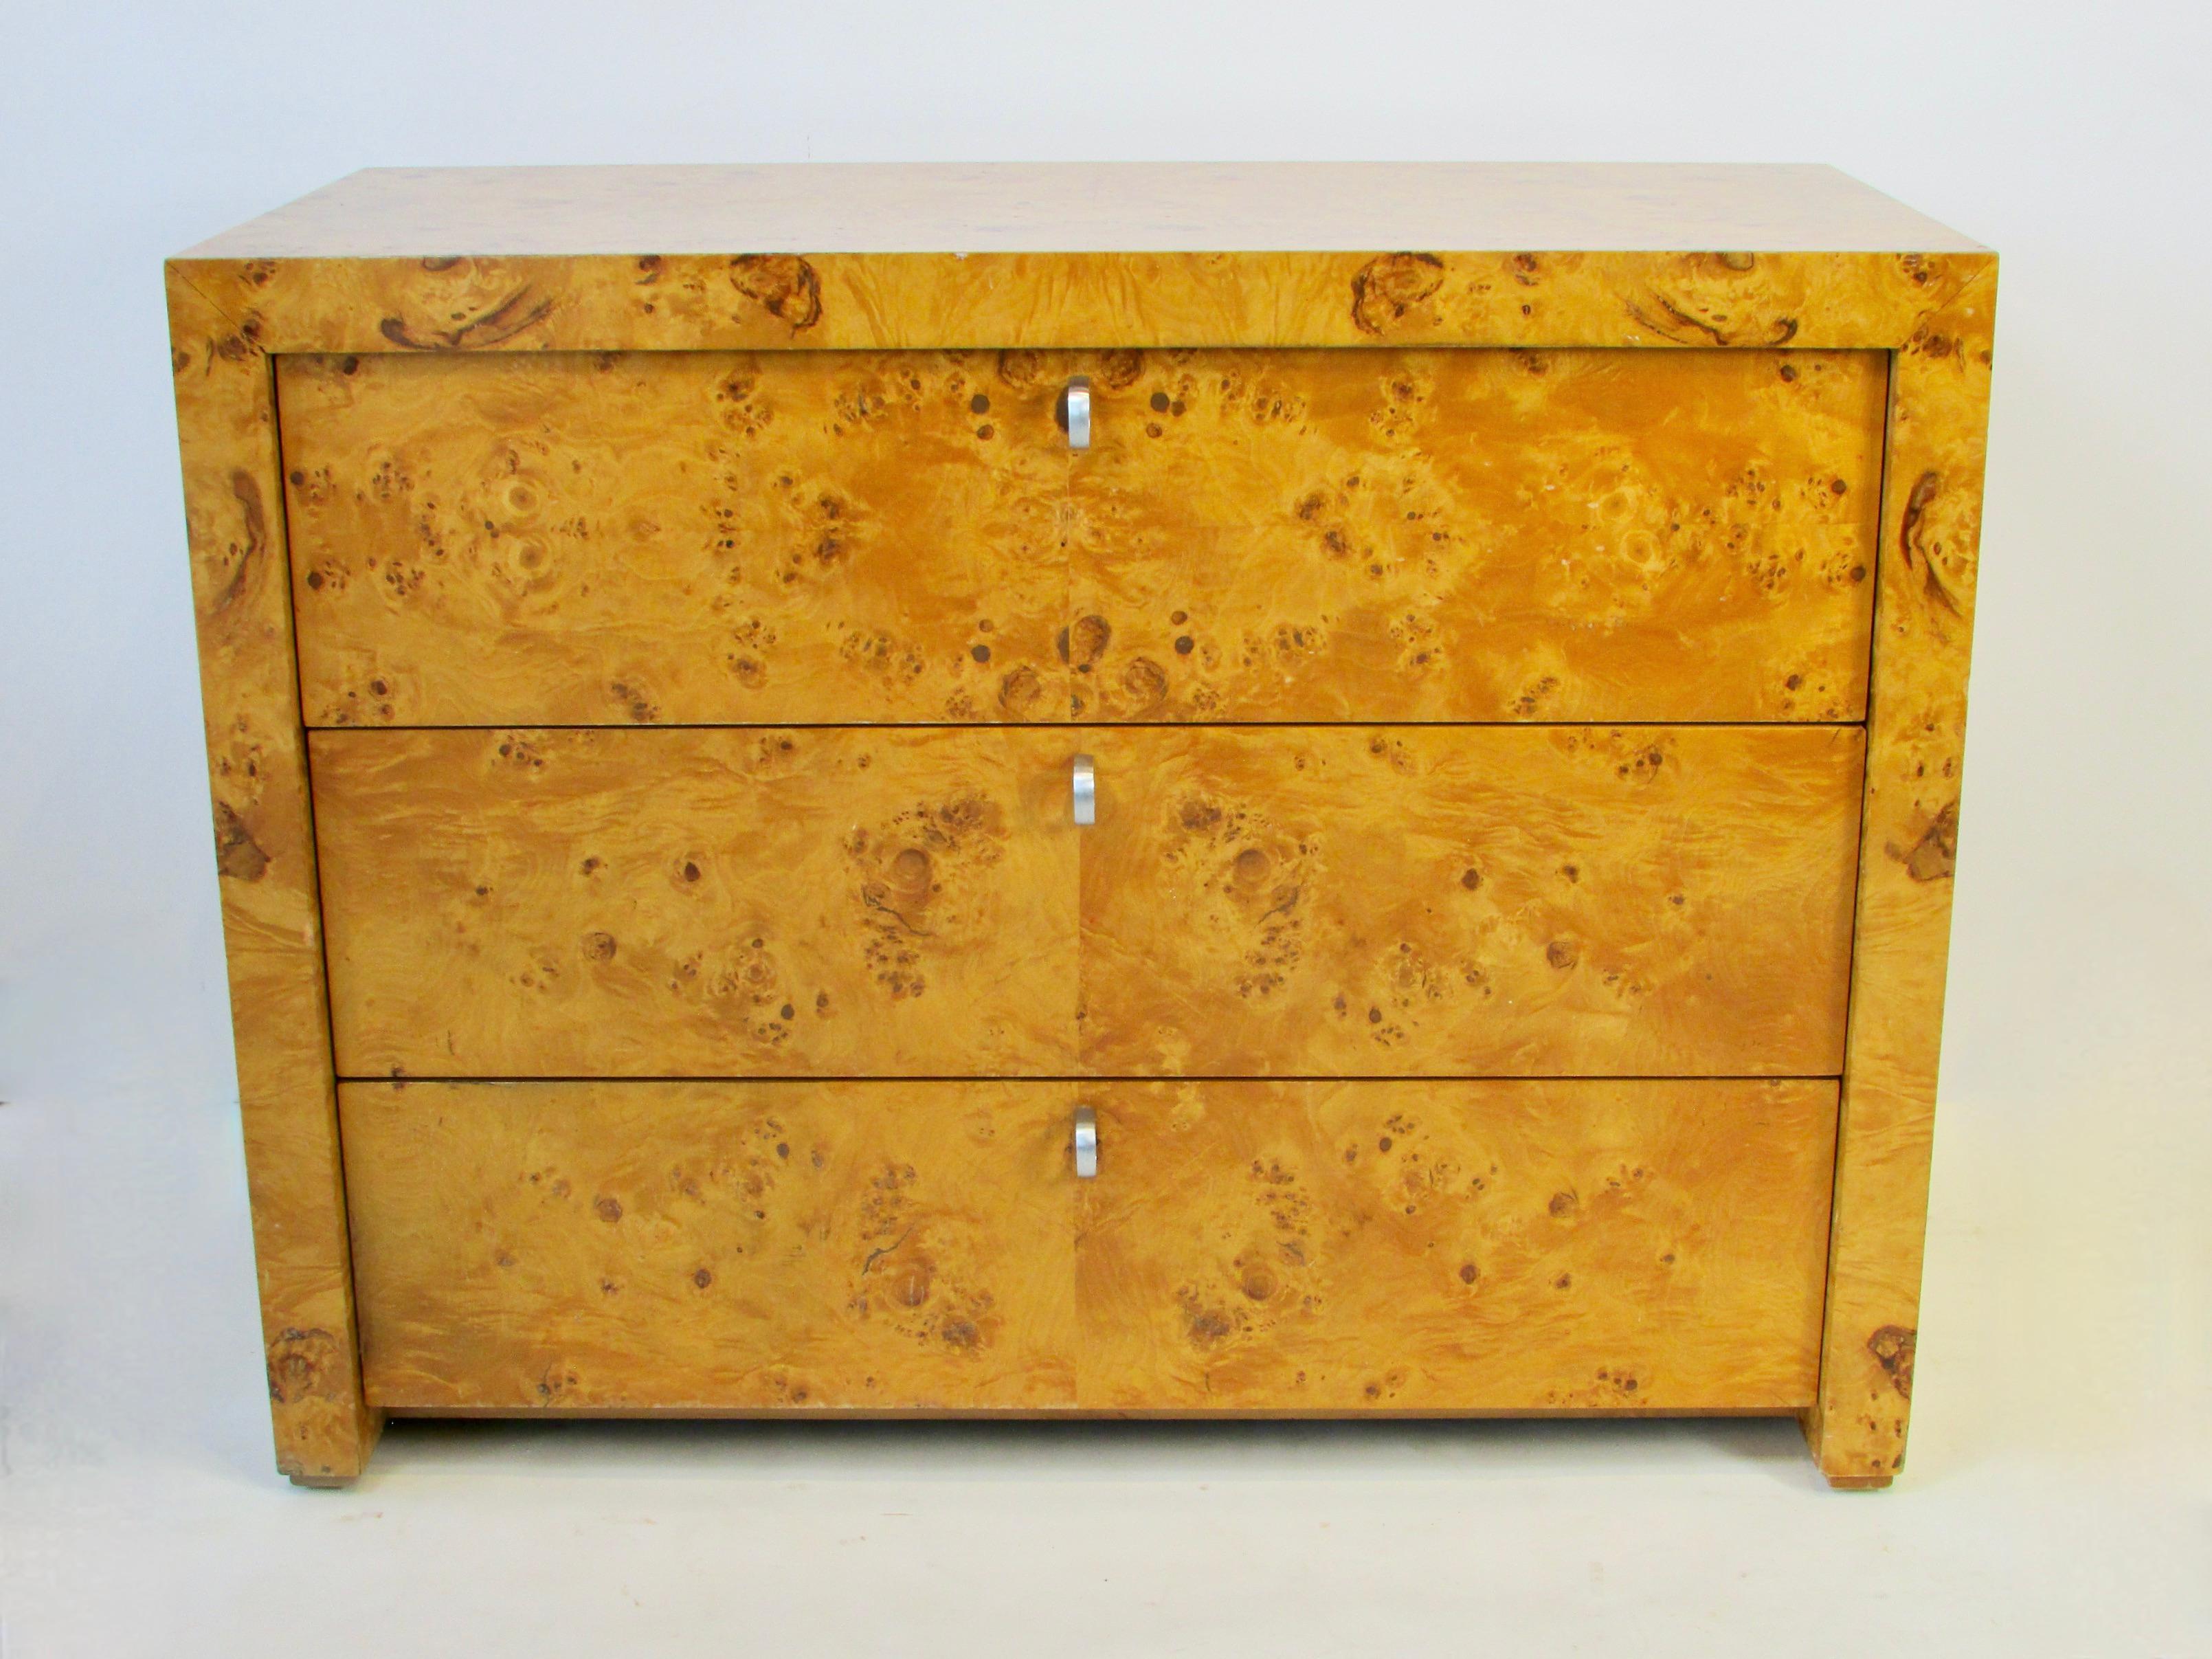 Pair of three drawer cabinets covered in blonde burl. Each drawer having a single chrome center pull. Patina to the finish but no damage or apologies. Stamped Hekman inside drawer of one cabinet.